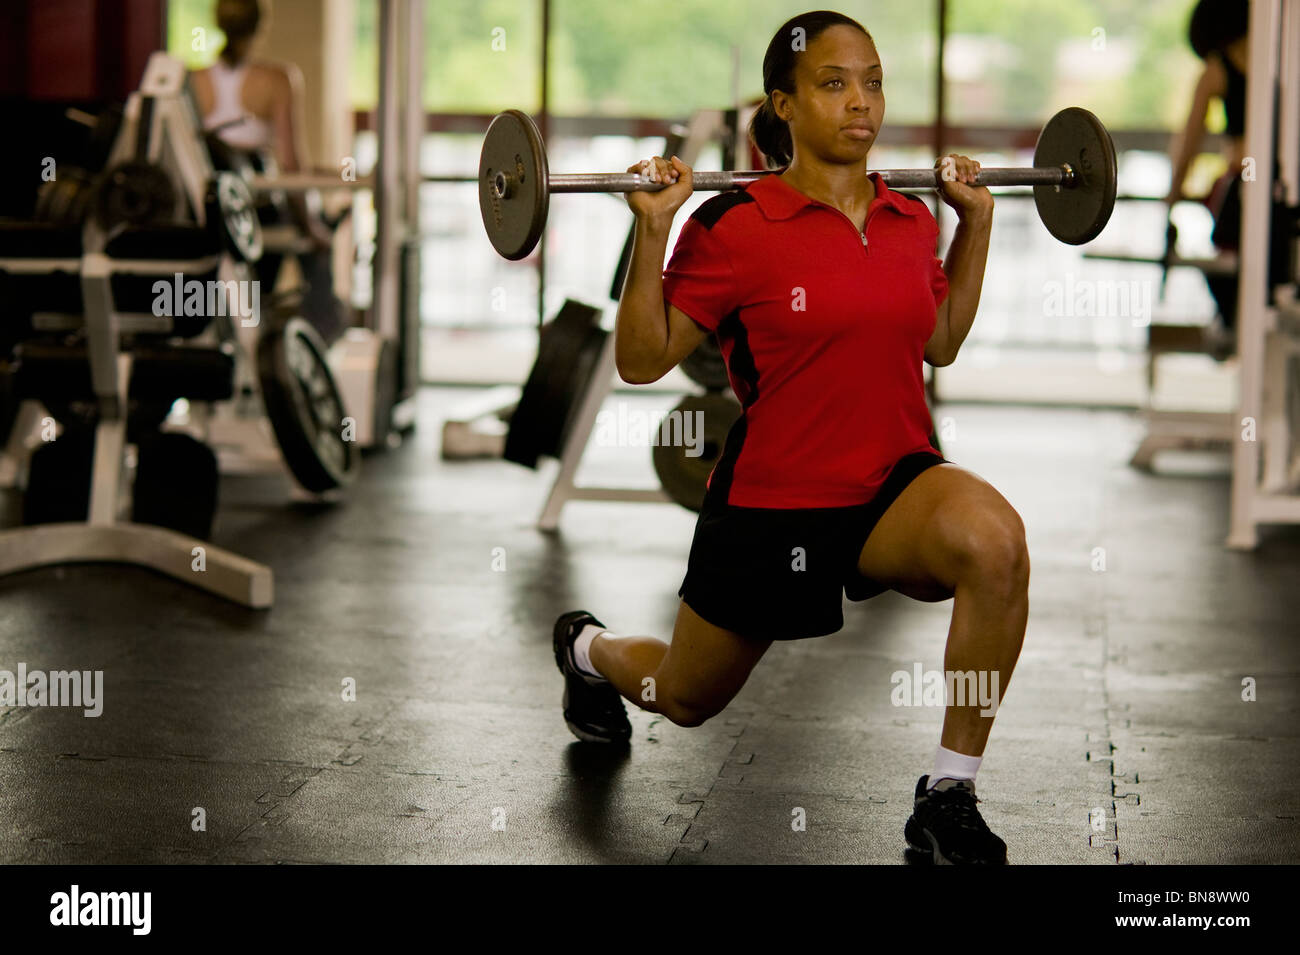 Woman weight lifting in health club Stock Photo